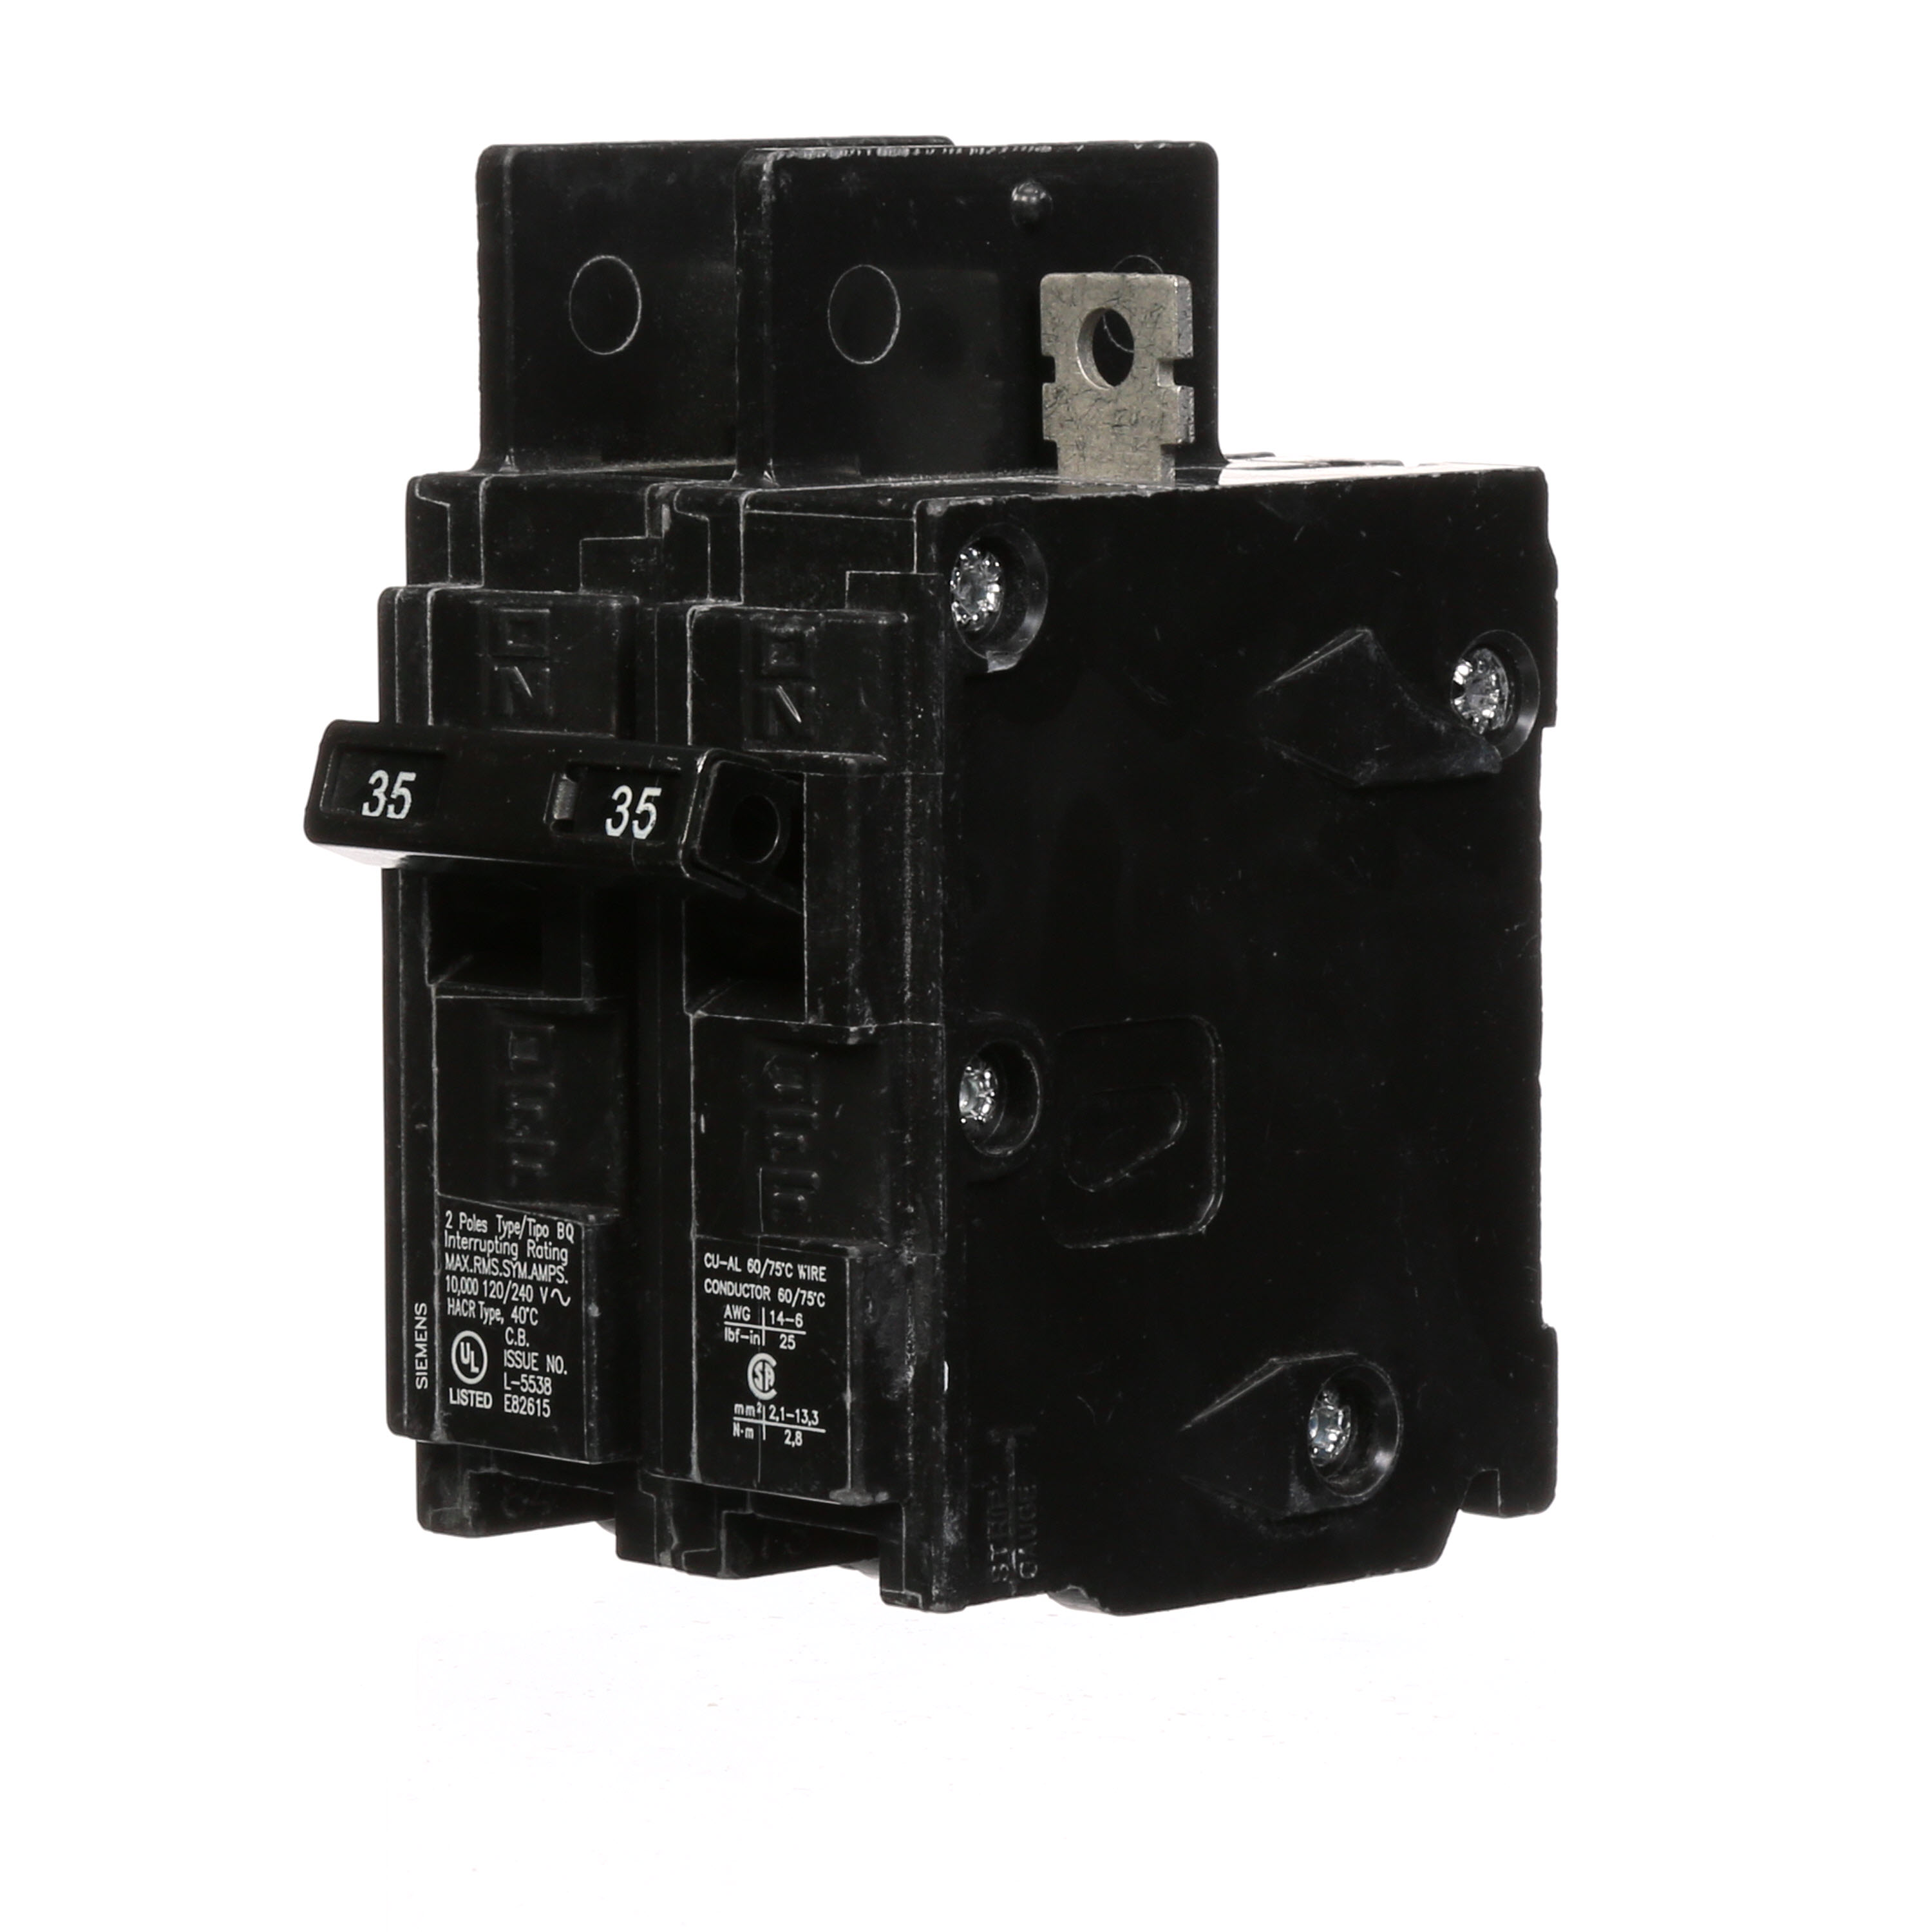 Siemens Low Voltage Molded Case Circuit Breakers General Purpose MCCBs - Type BQ, 2-Pole, 120/240VAC are Circuit Protection Molded Case Circuit Breakers. 2-Pole Common-Trip circuit breaker type BQ. Rated 120/240V (035A) (AIR 10 kA). Special features Load side lugs are included.